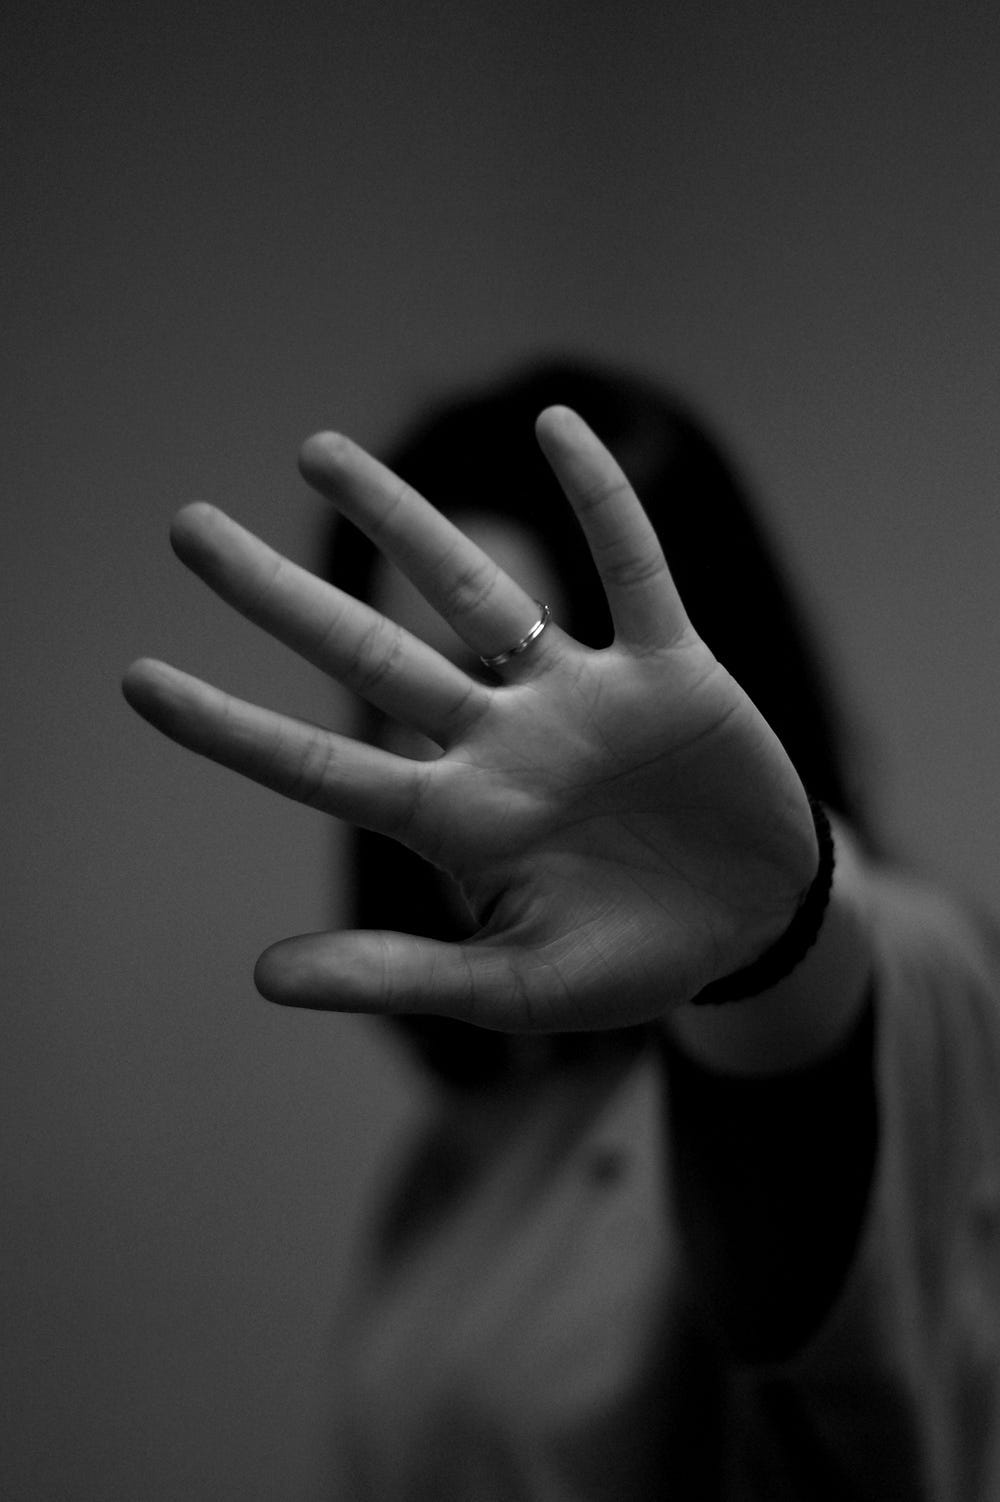 A person holds their hand in front of their face in a “stop” gesture.